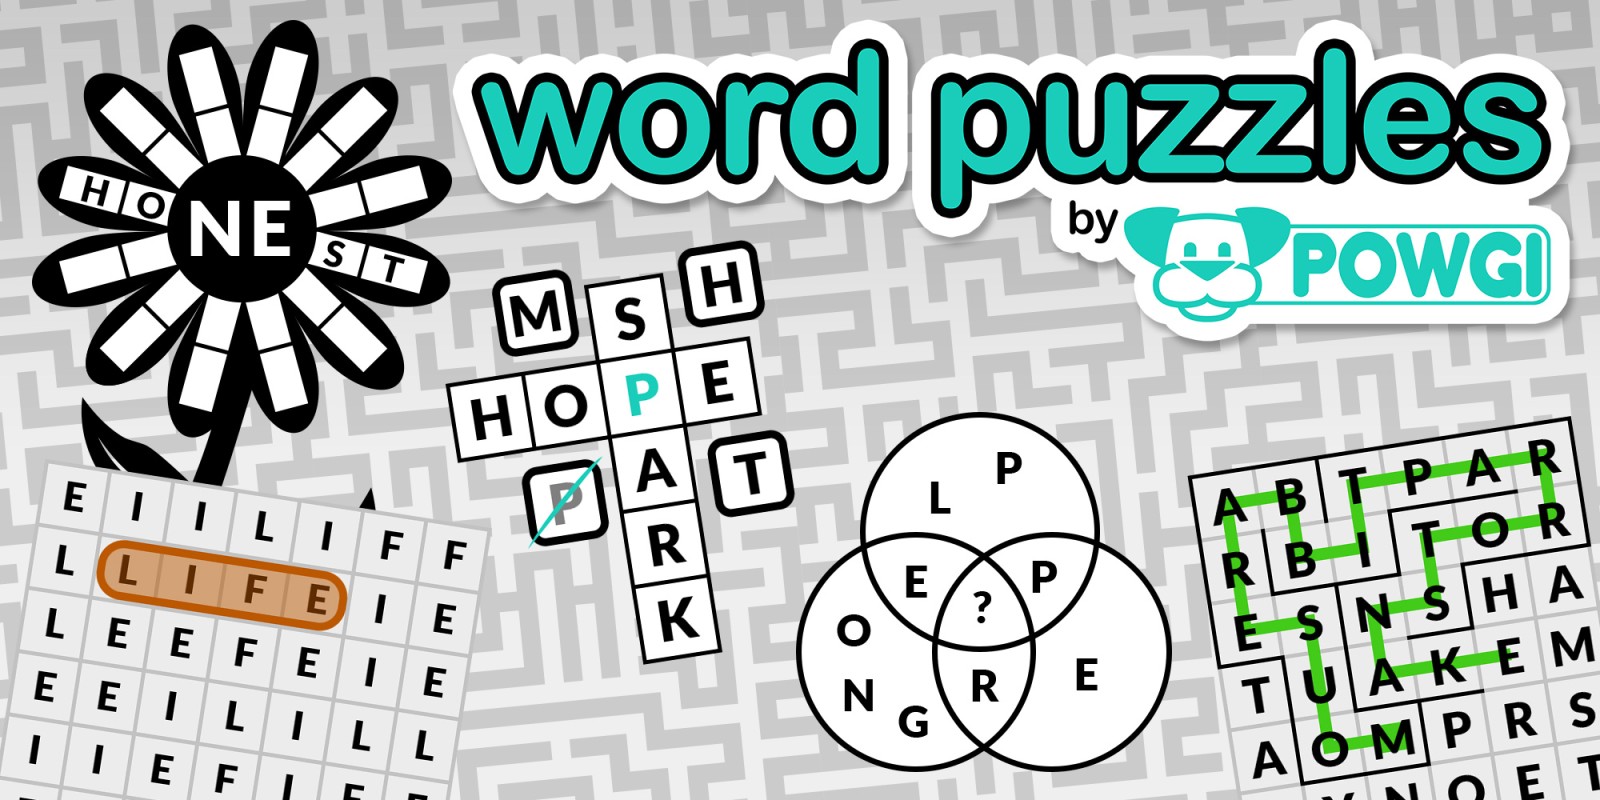 Word Puzzles by POWGI | Nintendo Switch download software ...